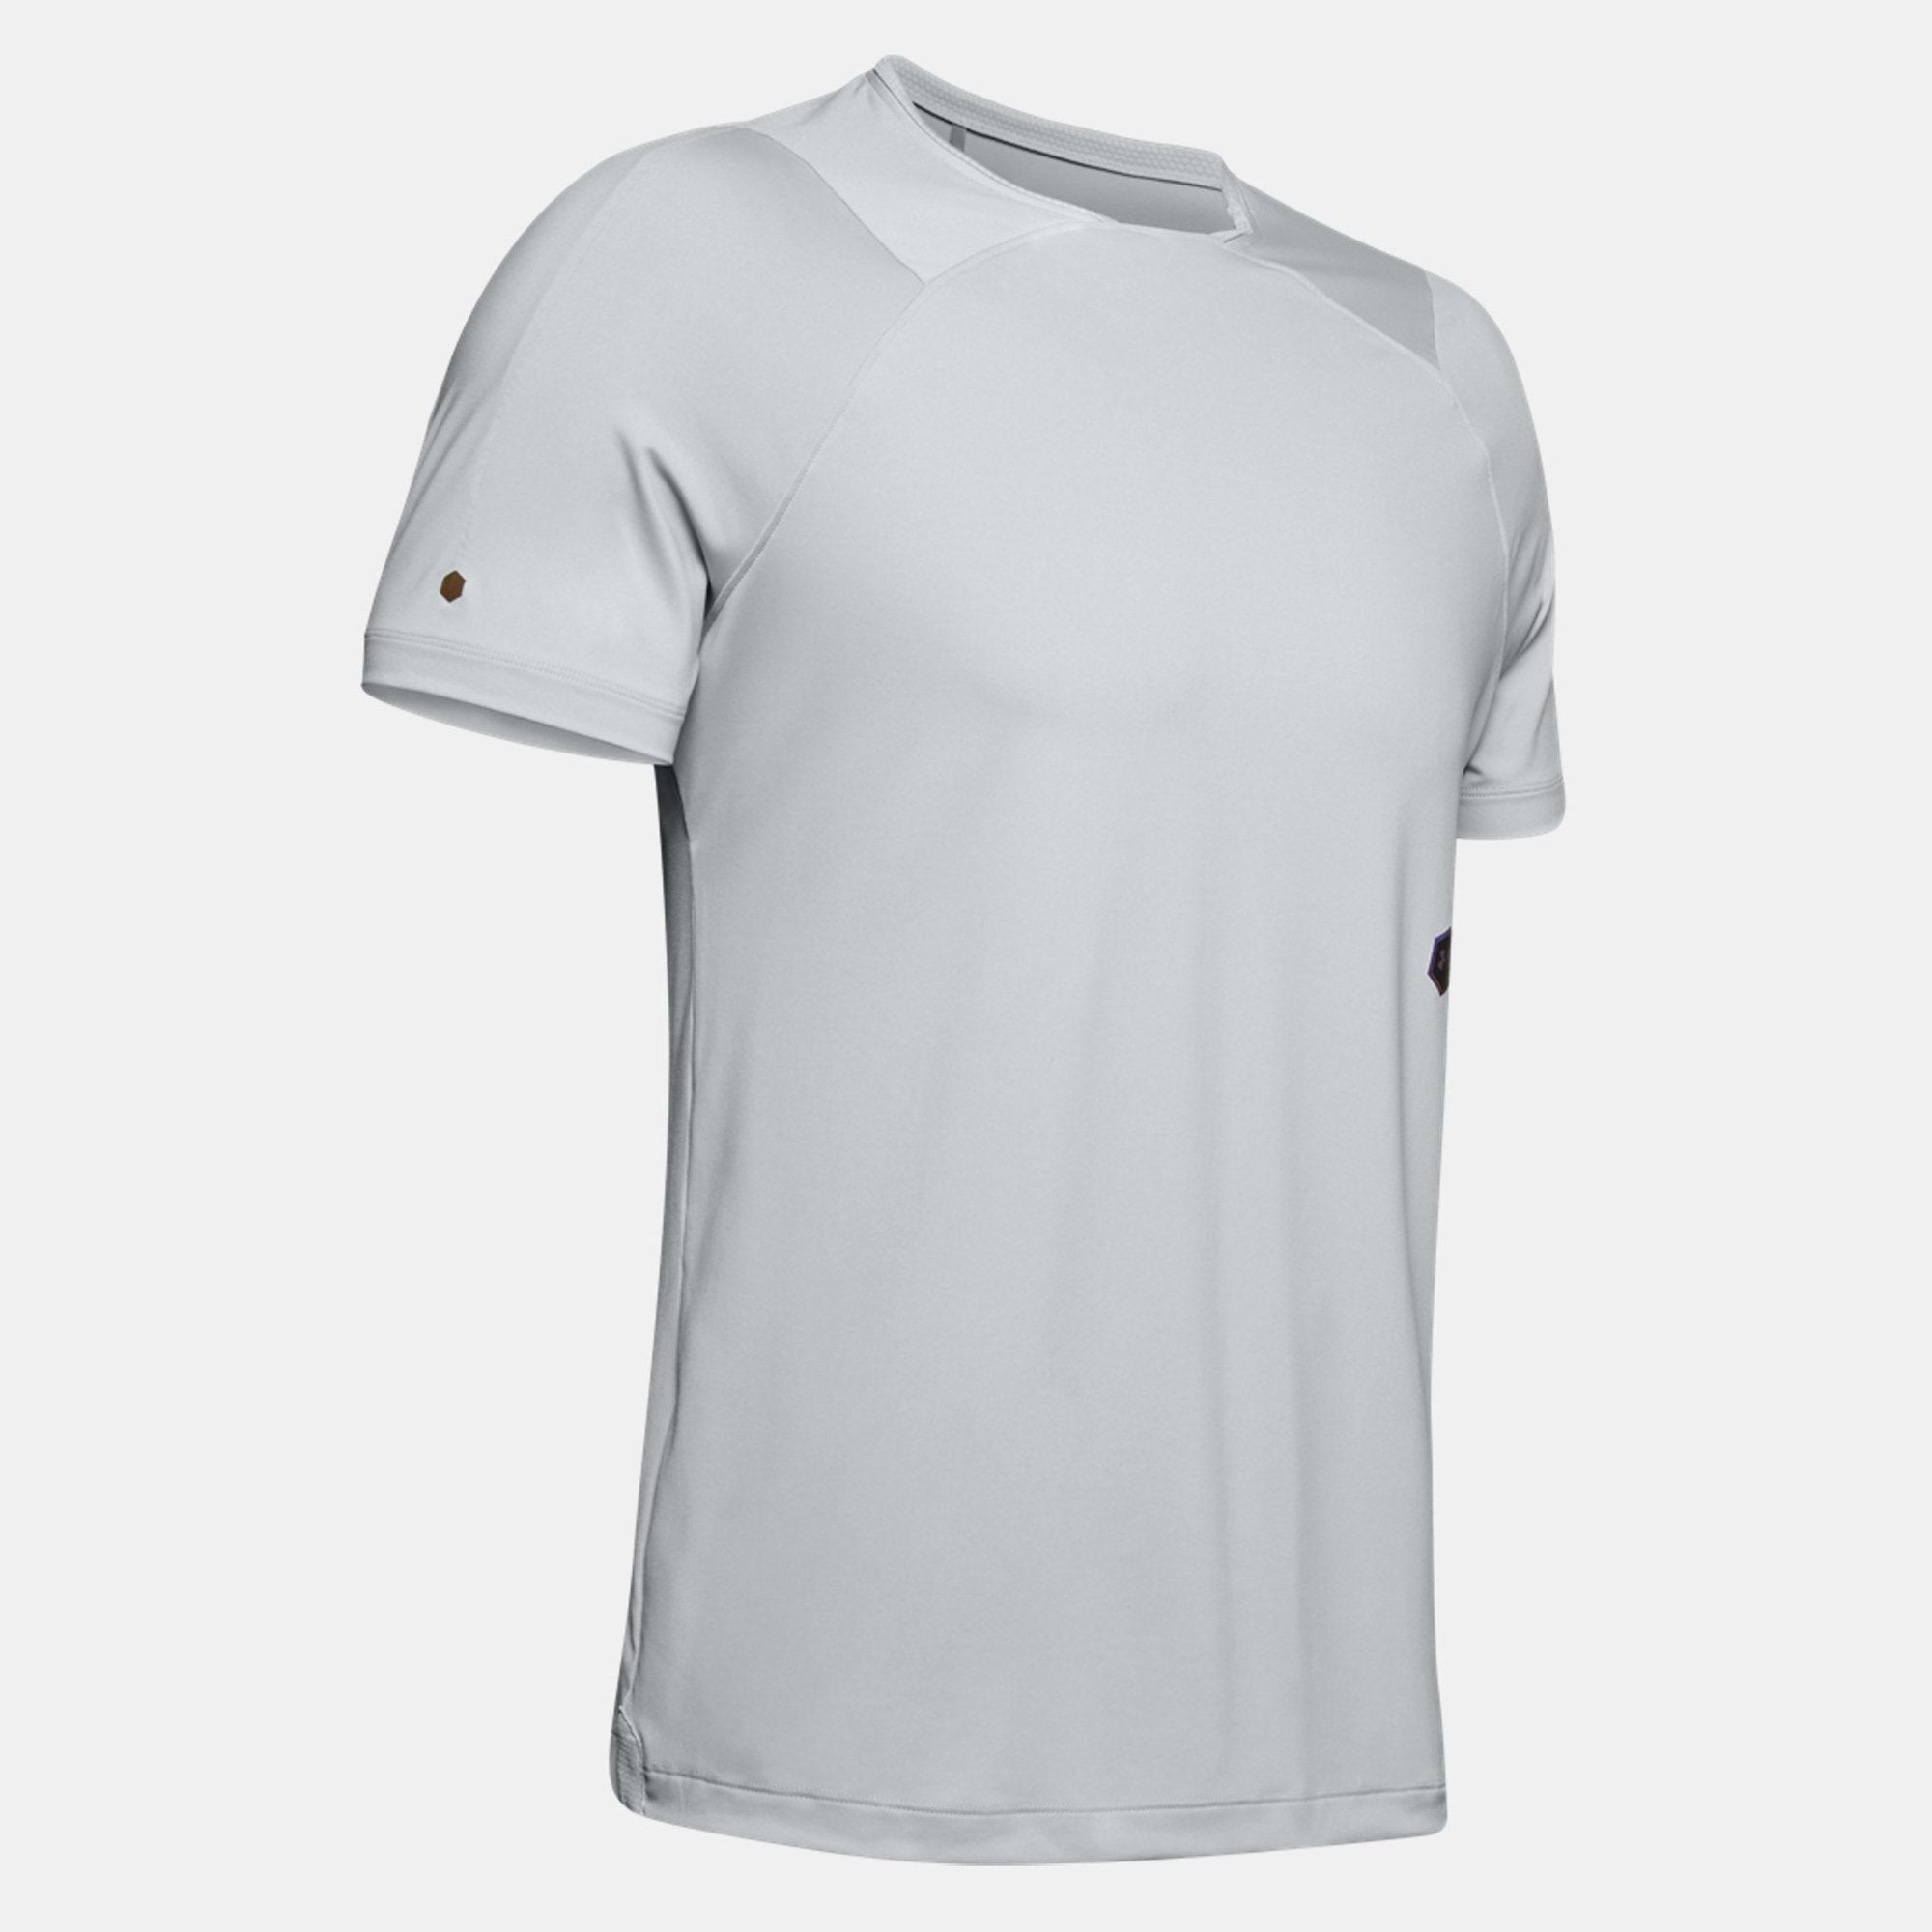 shirts like under armour